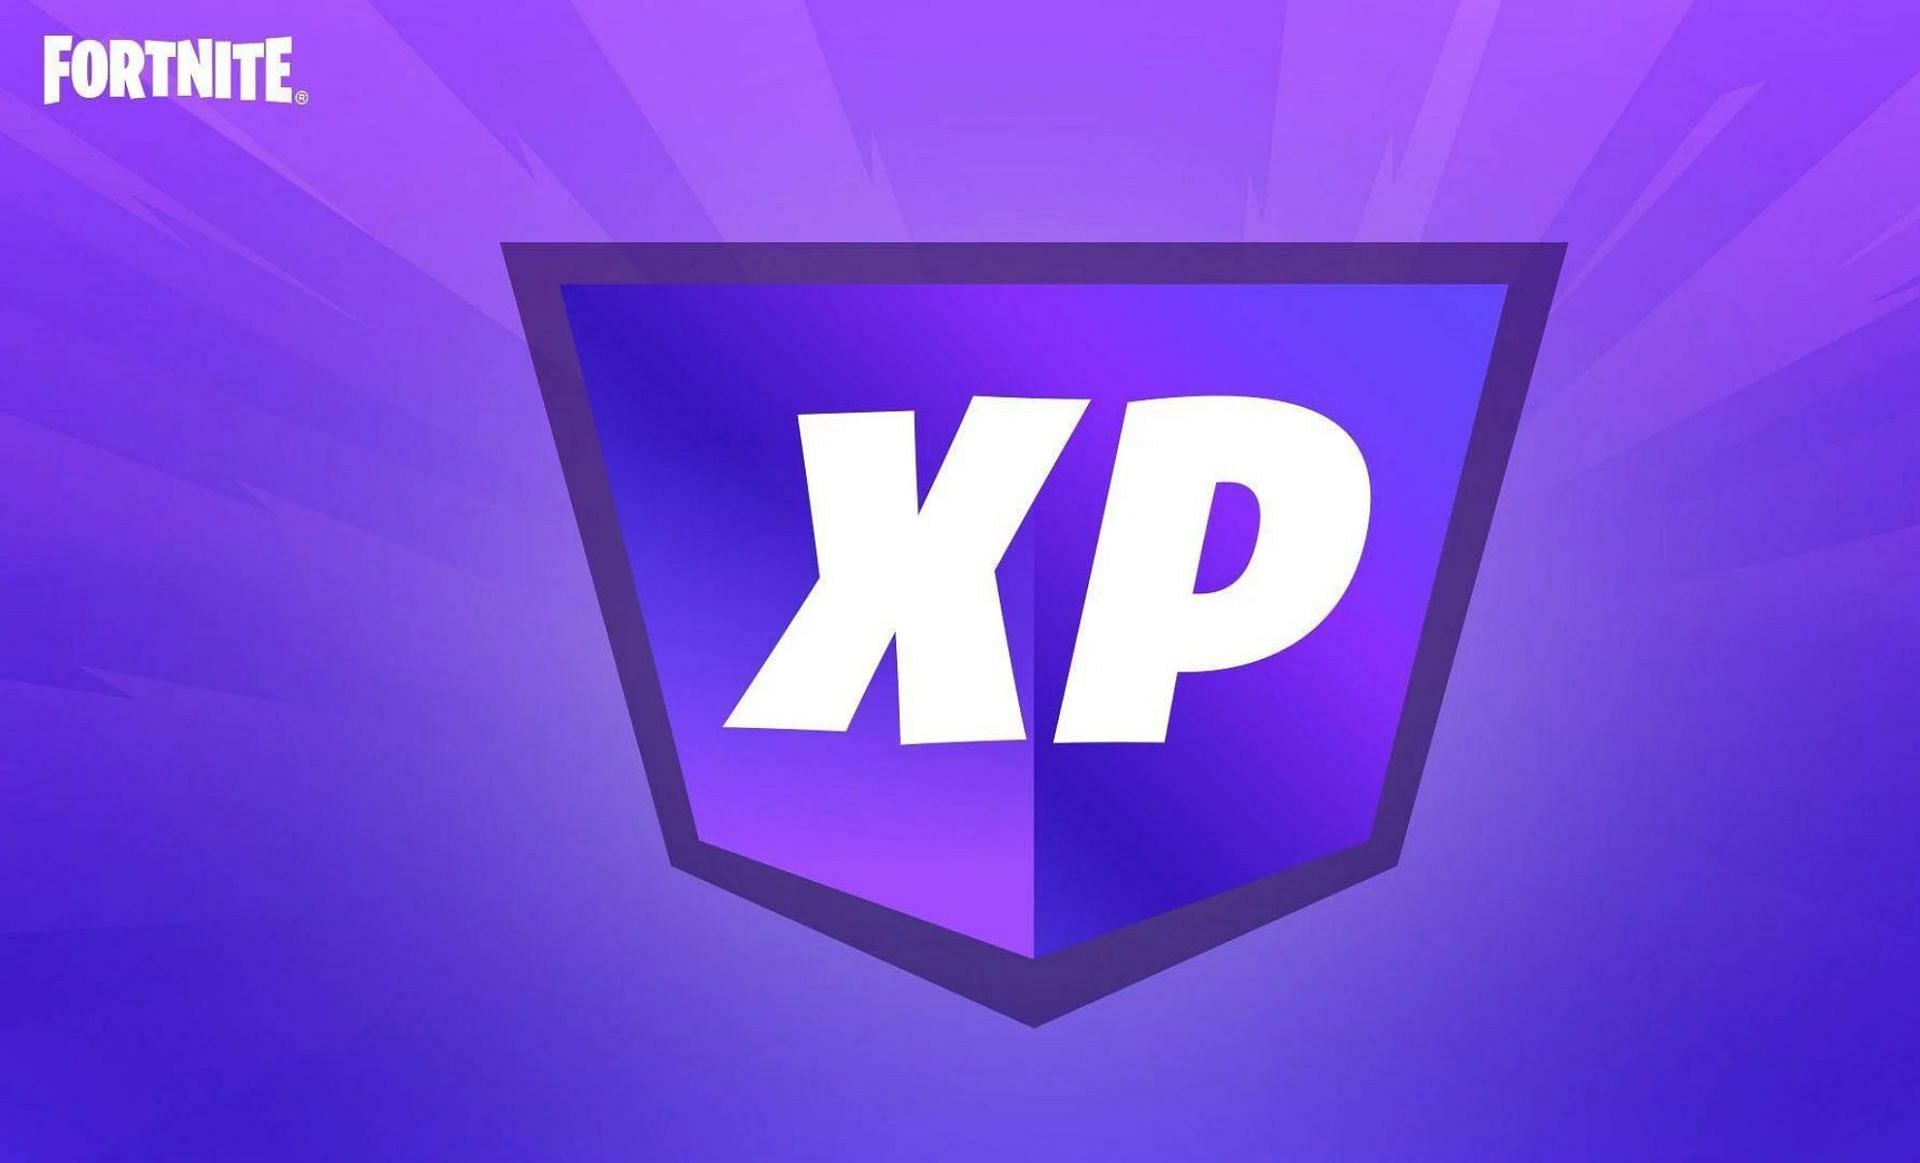 Fortnite XP glitch has surfaced (Image via Epic Games)